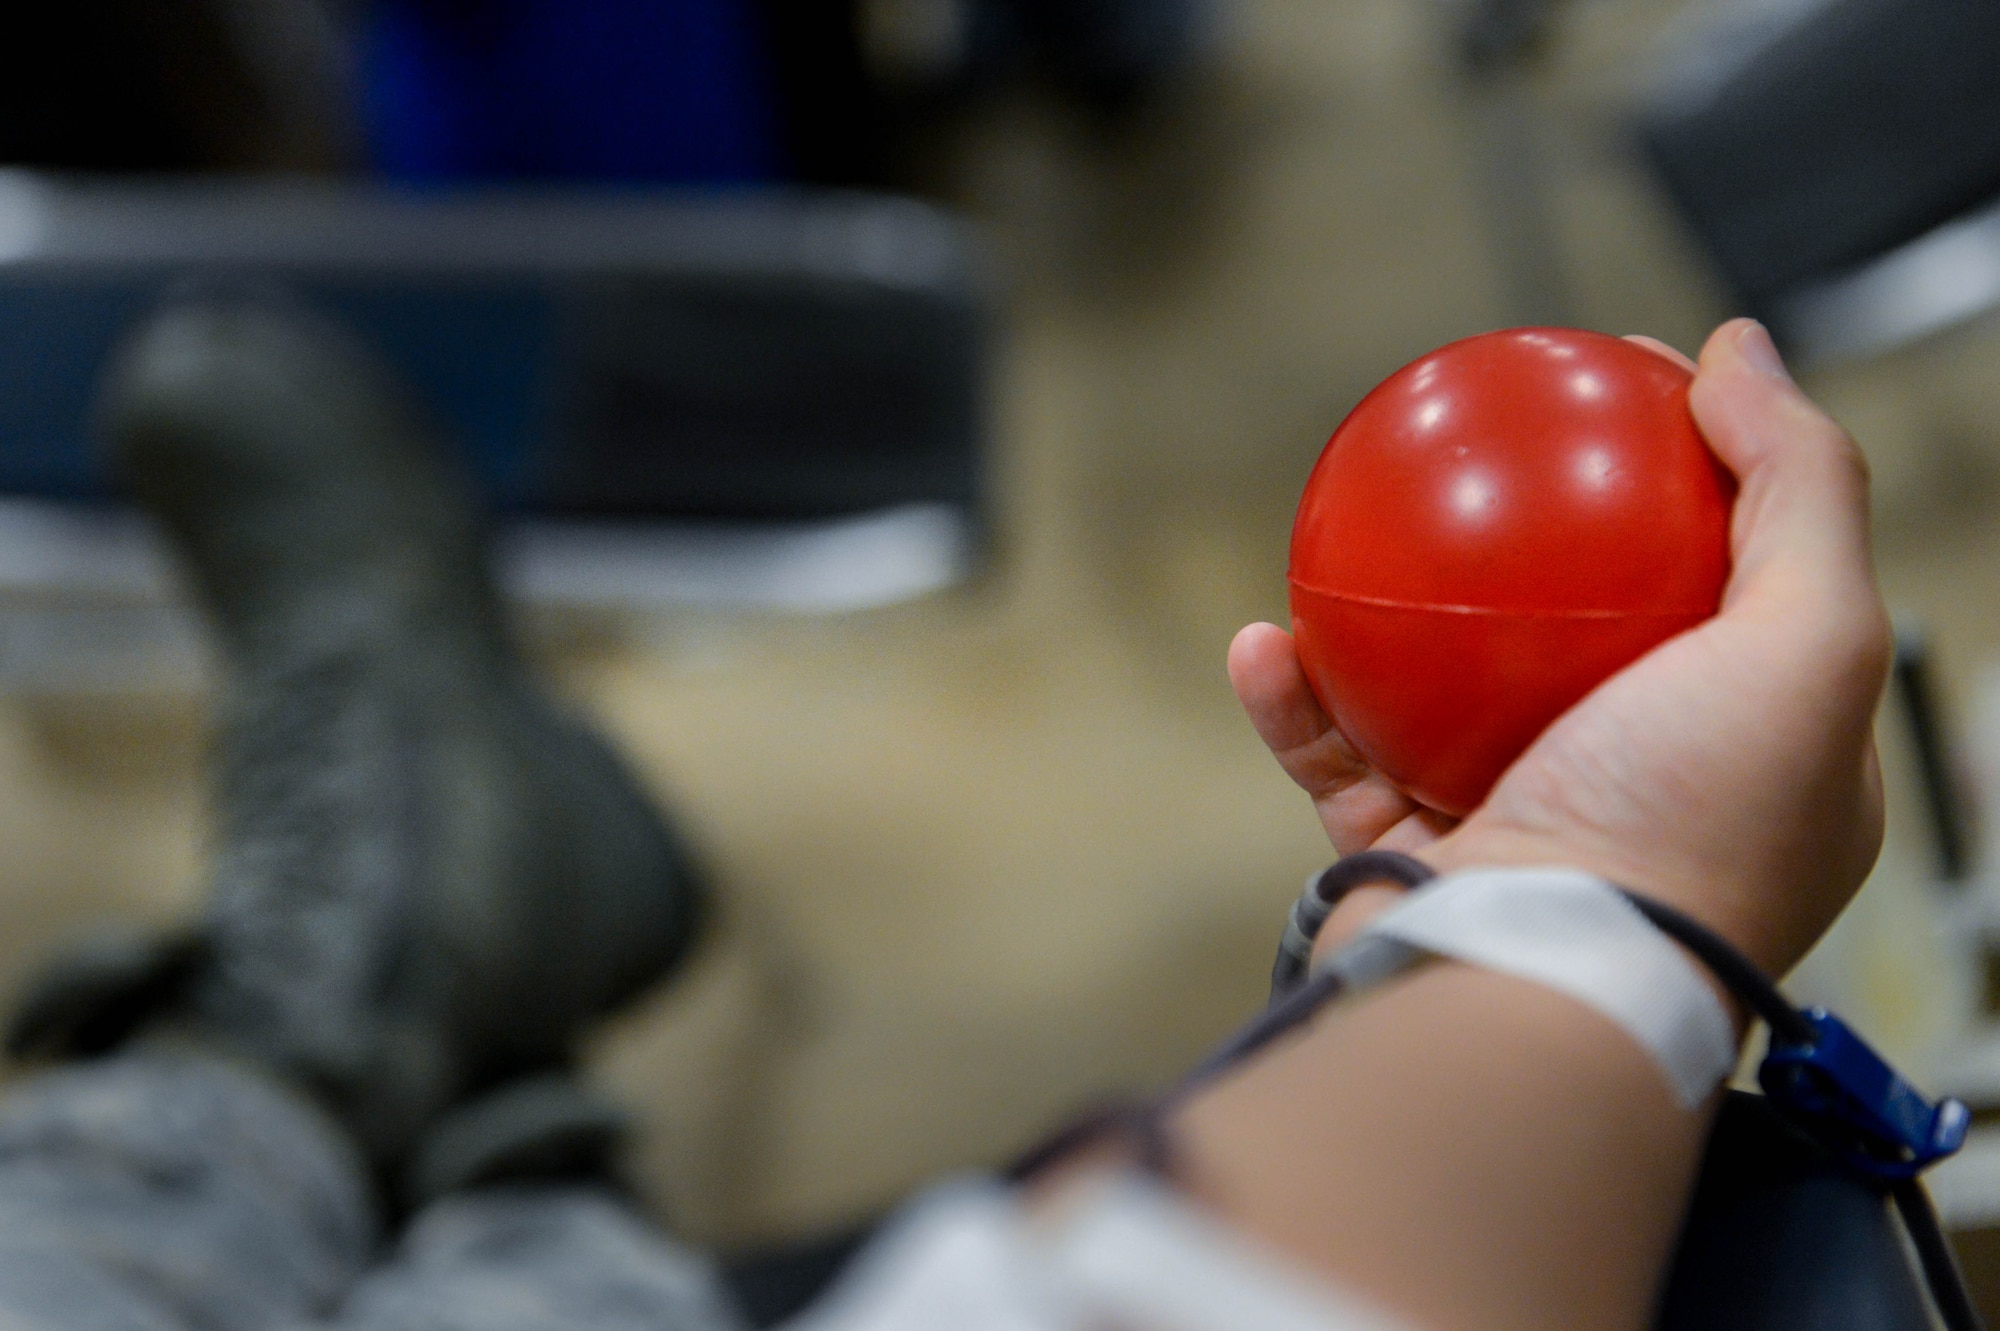 An Airman squeezes a stress ball as he donates blood at the 2017 LifeShare Blood Drive at Barksdale Air Force Base, La., June 16, 2017. Approximately every two seconds someone in the U.S. needs blood.(U.S. Air Force Photo/Airman 1st Class Sydney Bennett)